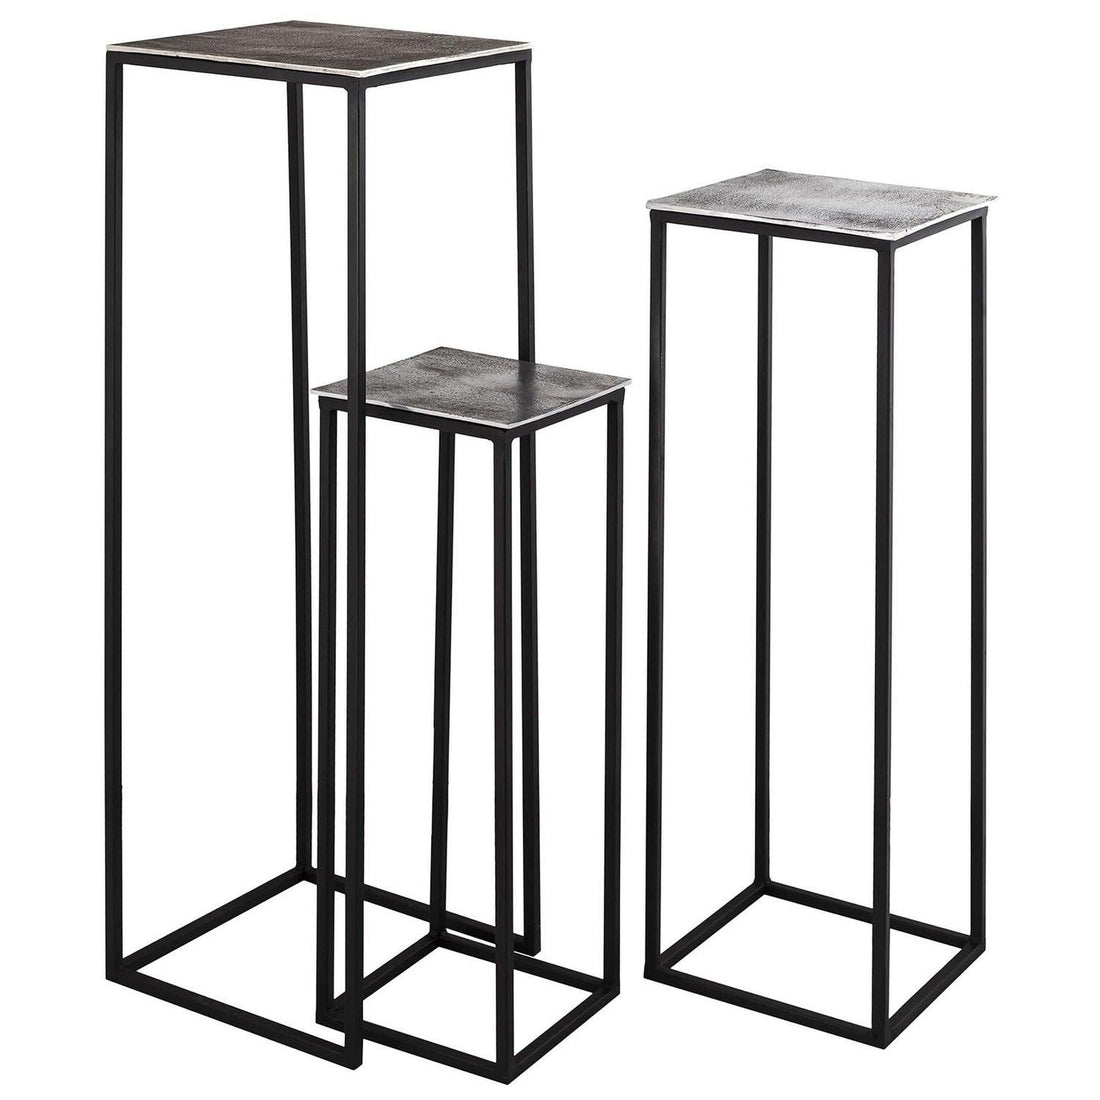 Farrah Collection Silver set of Three large Display Tables - £369.95 - Furniture > Tables > Nests Of Tables 